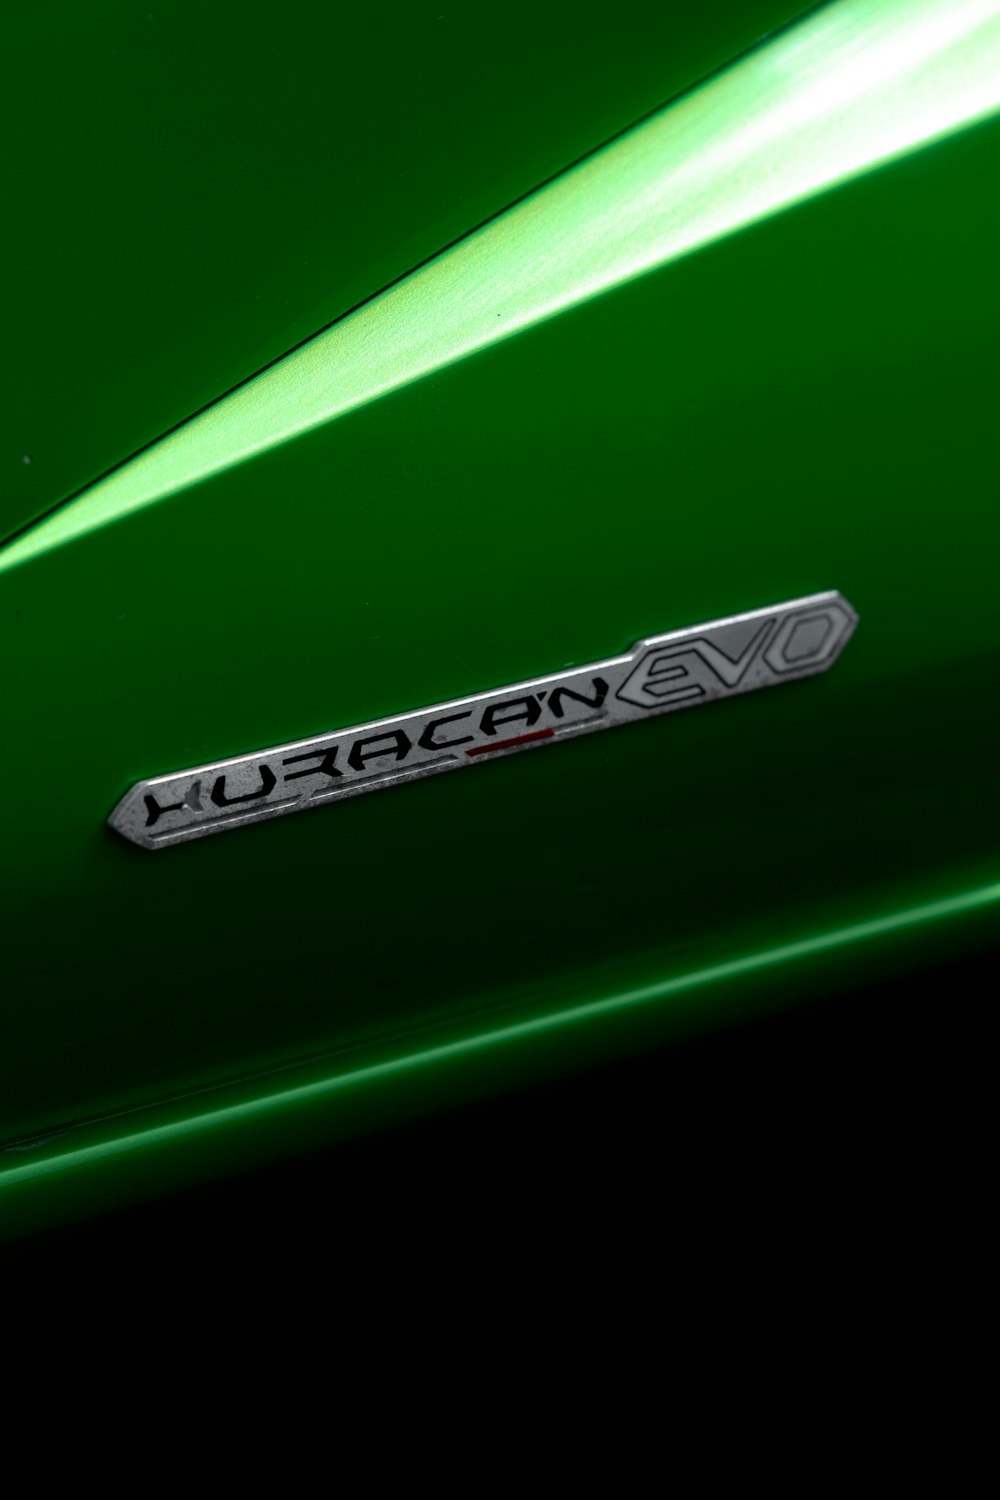 a close up of the emblem on a green sports car